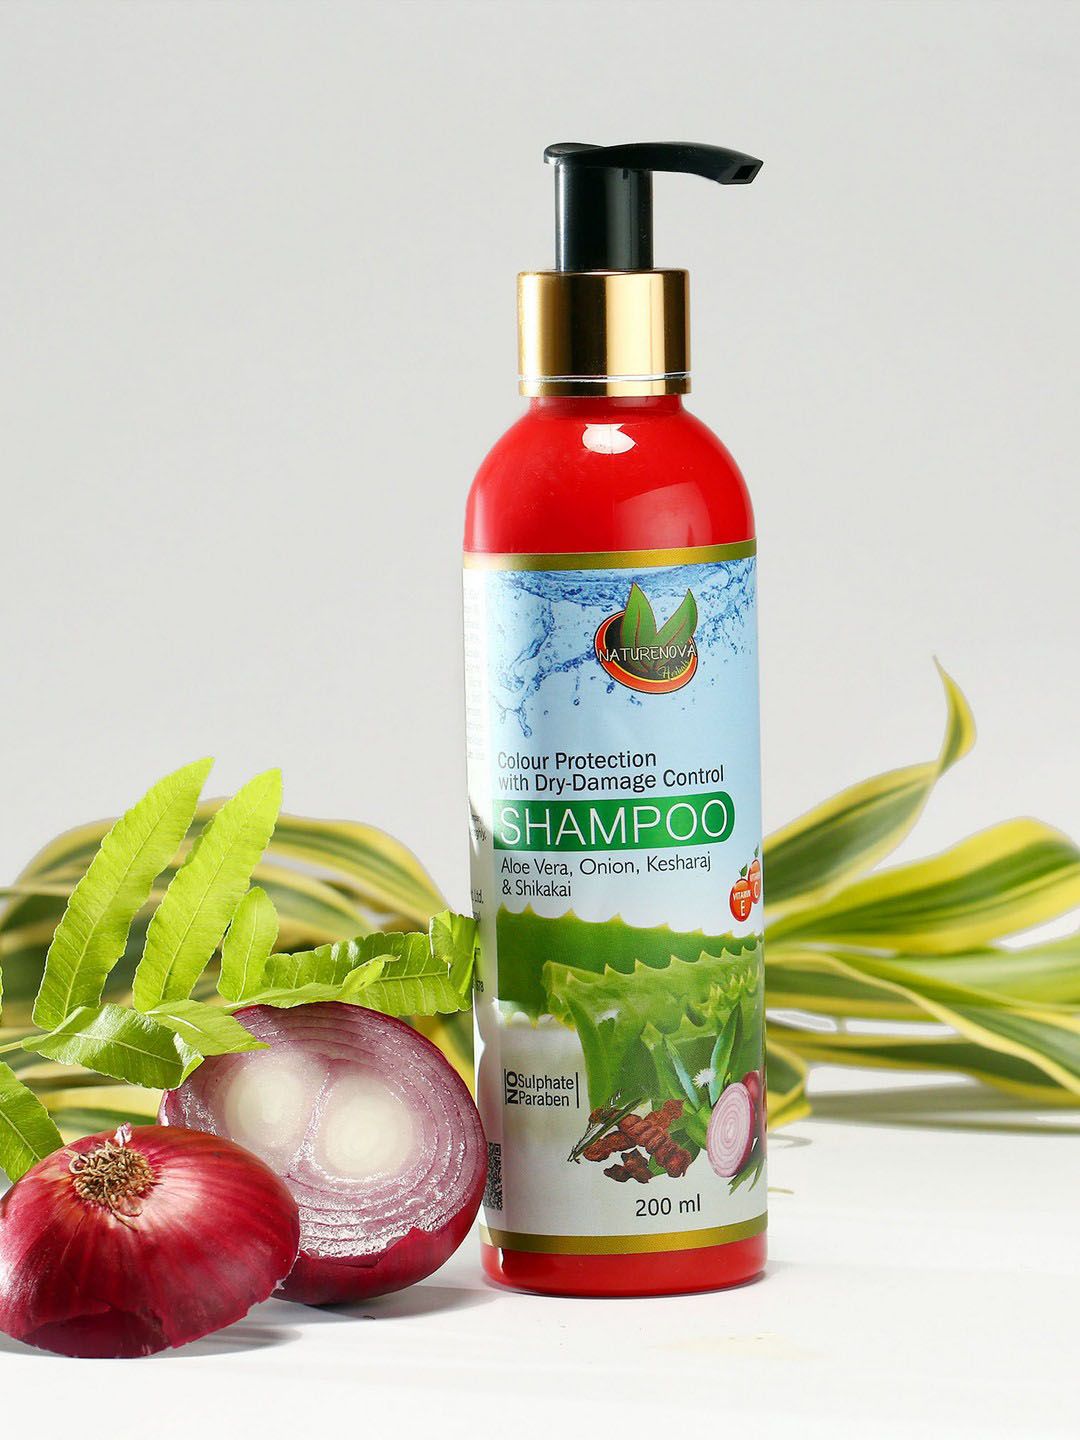 NatureNova Herbals Color Protection with Dry-Damage Control Shampoo - 200ml Price in India